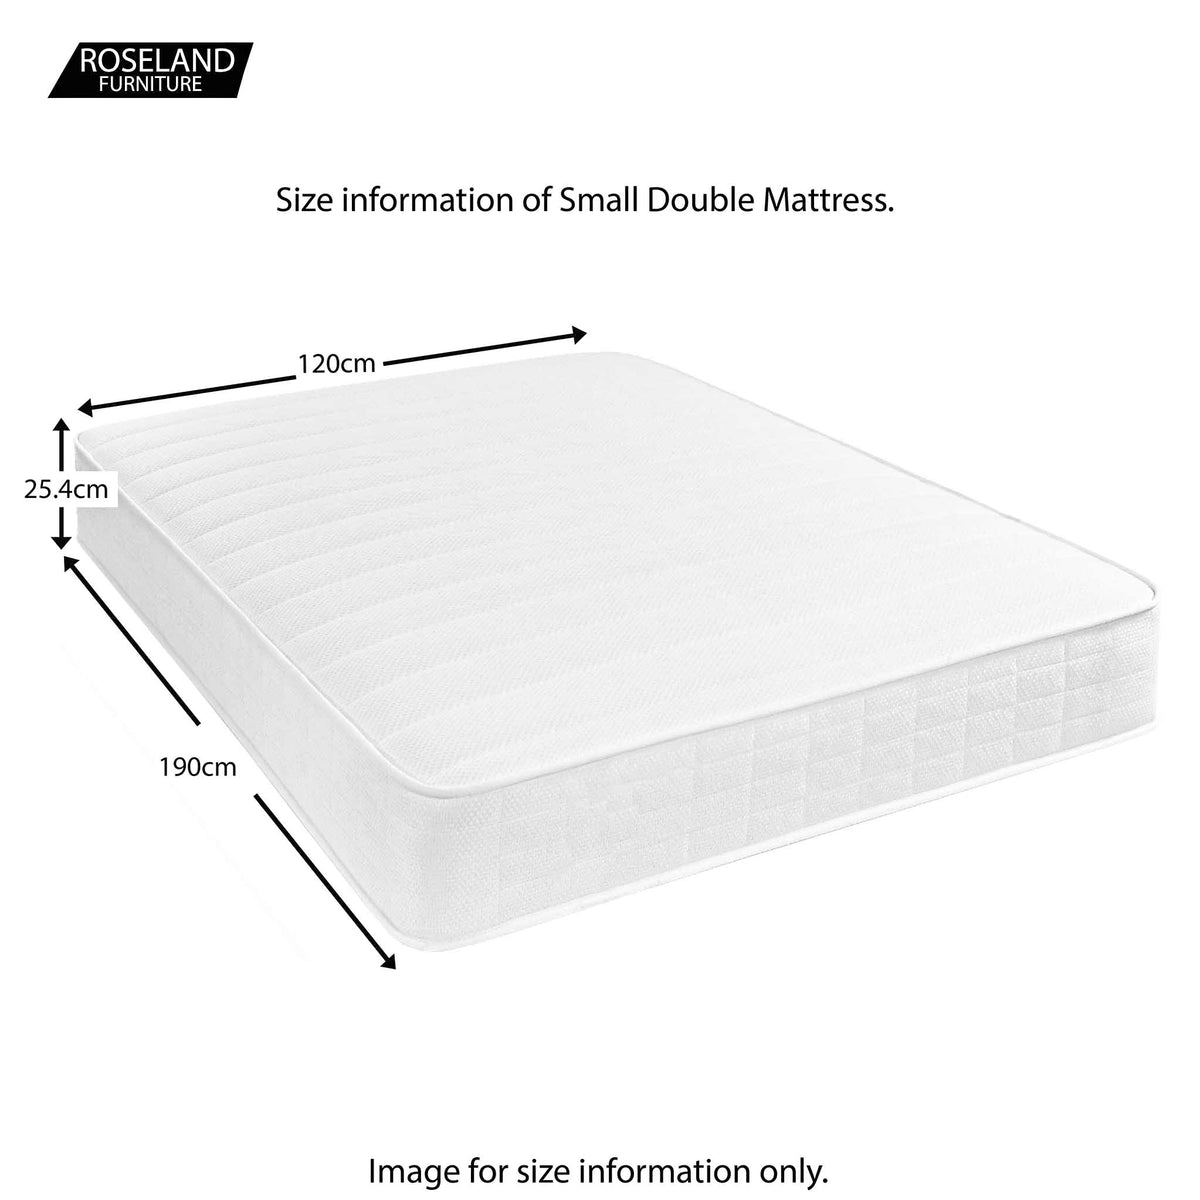 Roseland Sleep Stratford - Small Double Size Guide